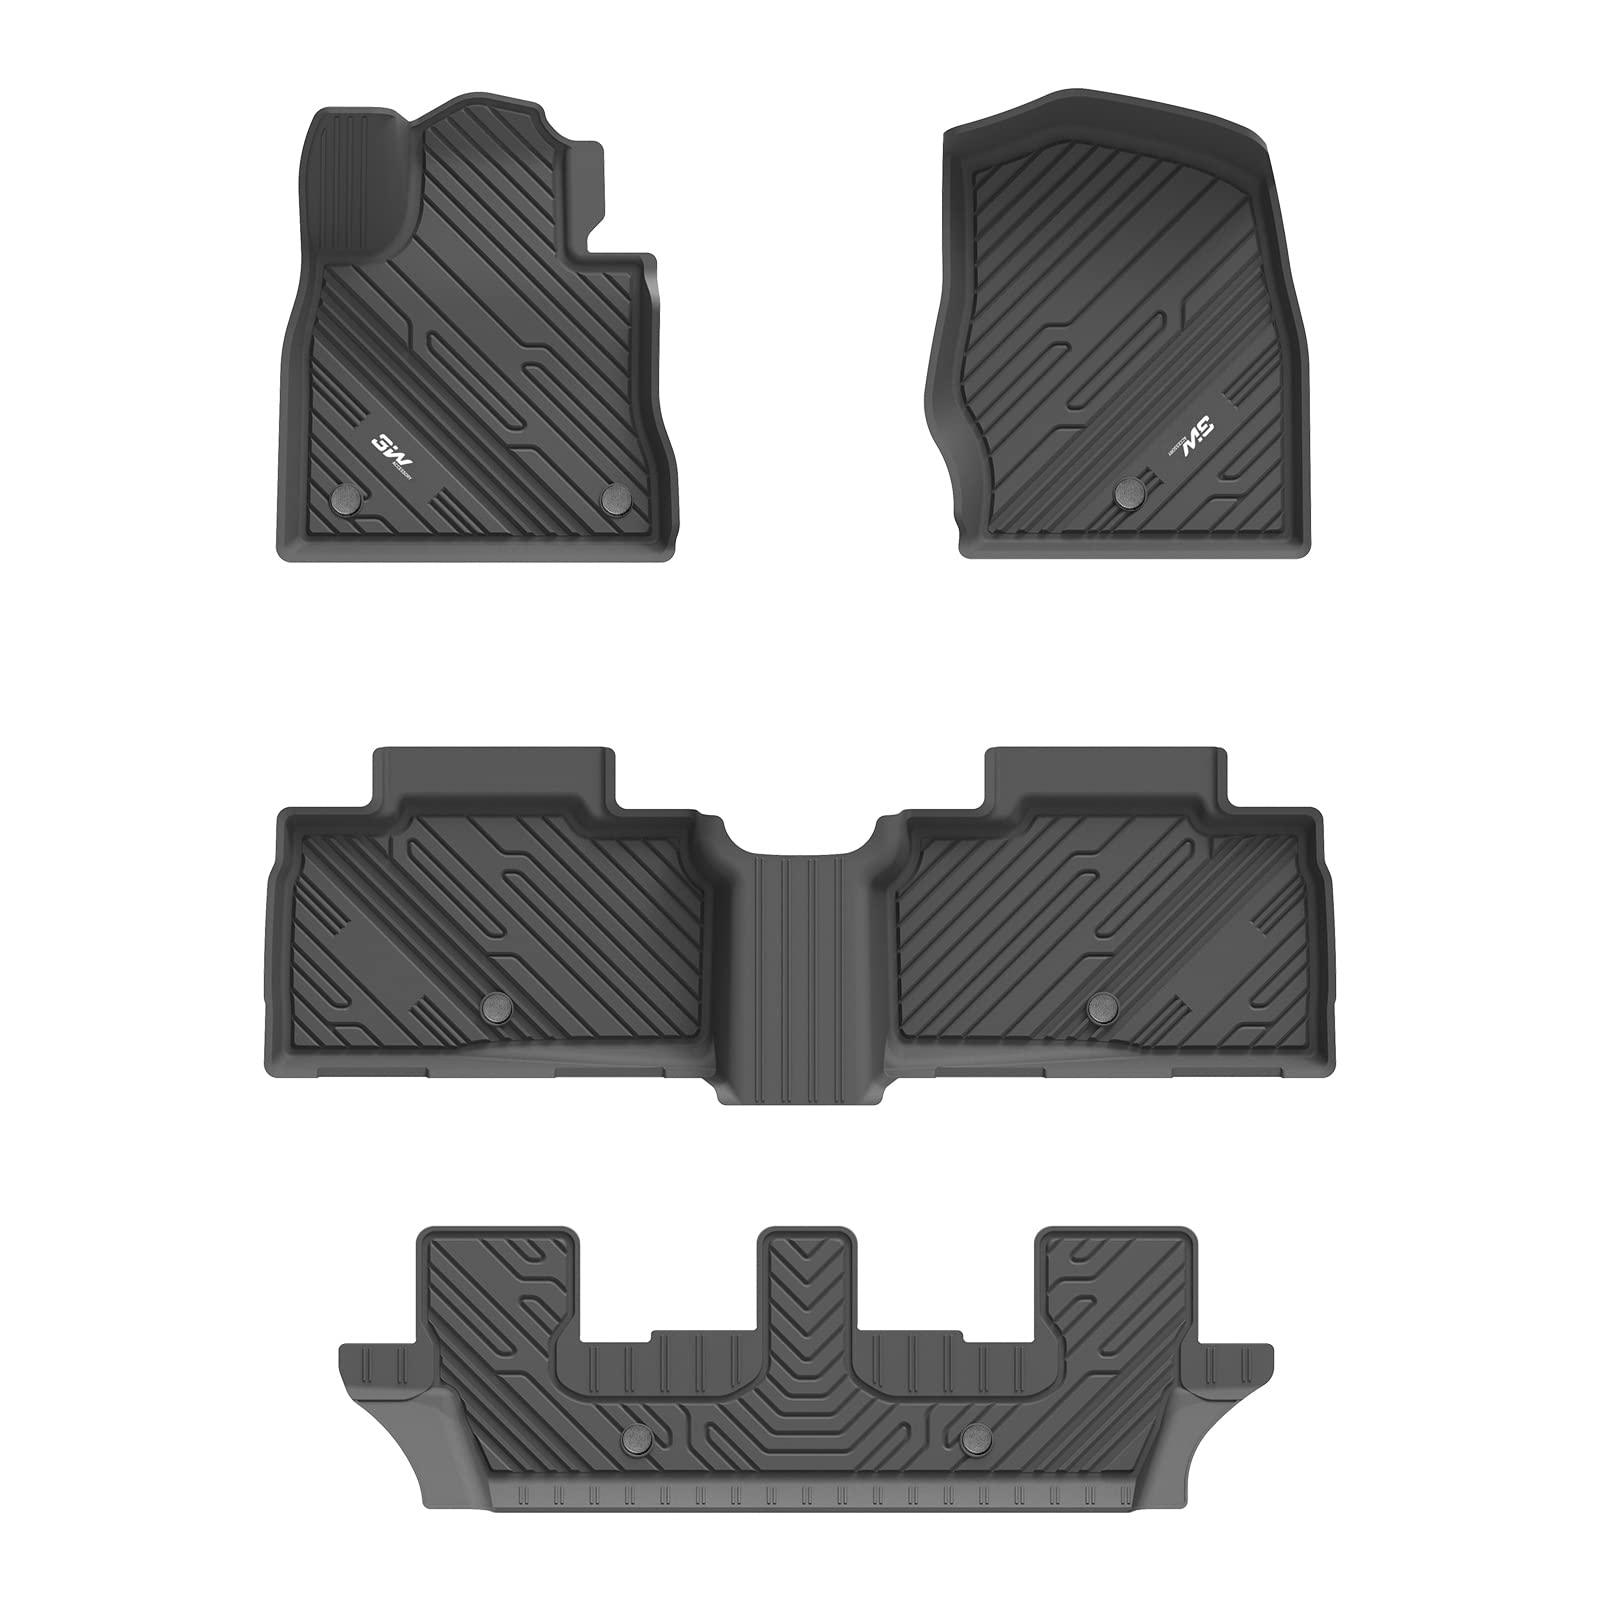 3W Ford Explorer 2020-2024 Floor Mats 7-Seat (Includes Hybrid) TPE Material & All-Weather Protection Vehicles & Parts 3Wliners 2020-2024 7 Seat Explorer 2020-2024 1st&2nd&3rd Row Mats